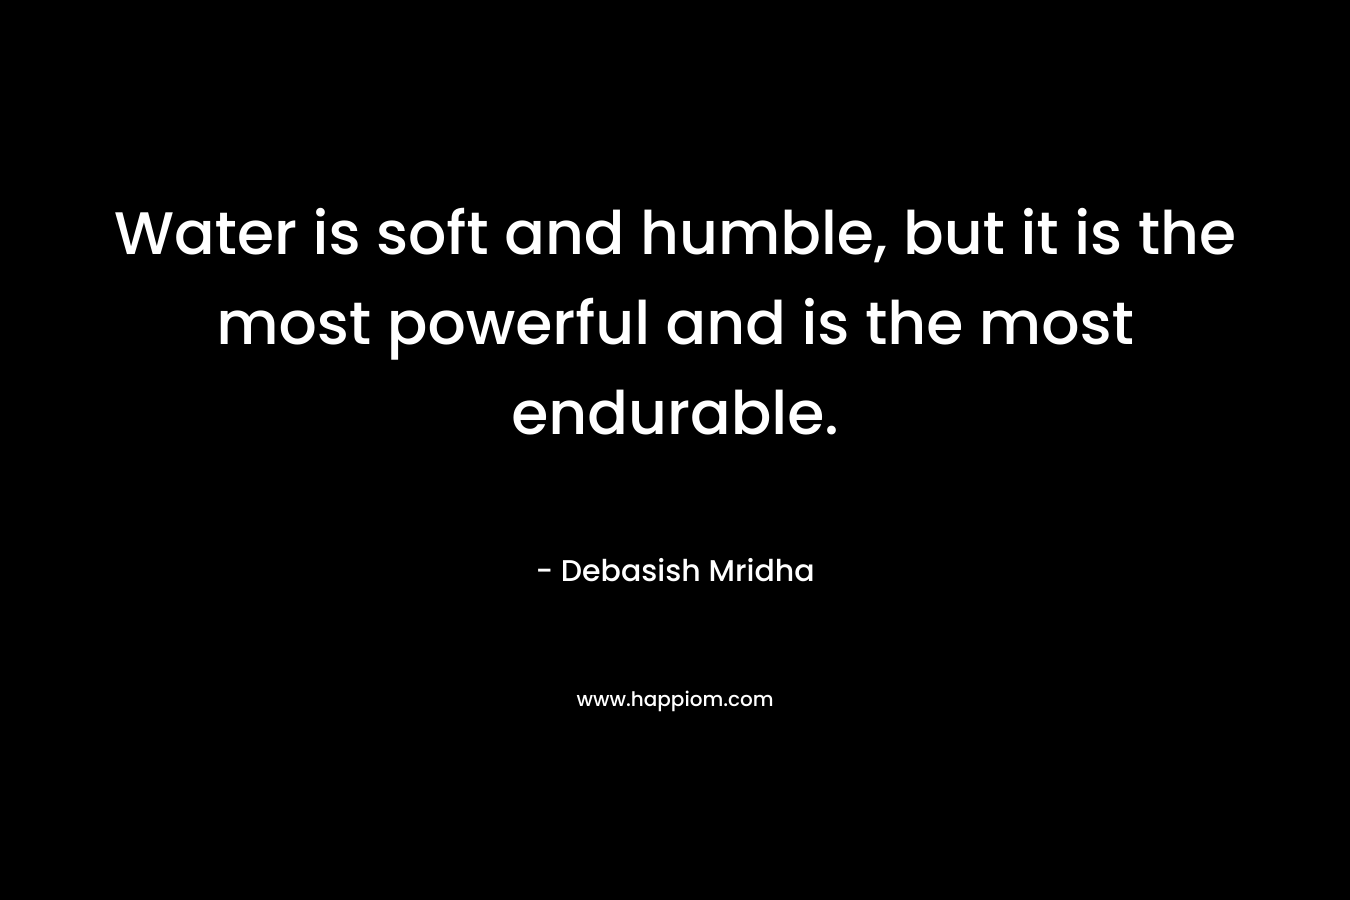 Water is soft and humble, but it is the most powerful and is the most endurable.